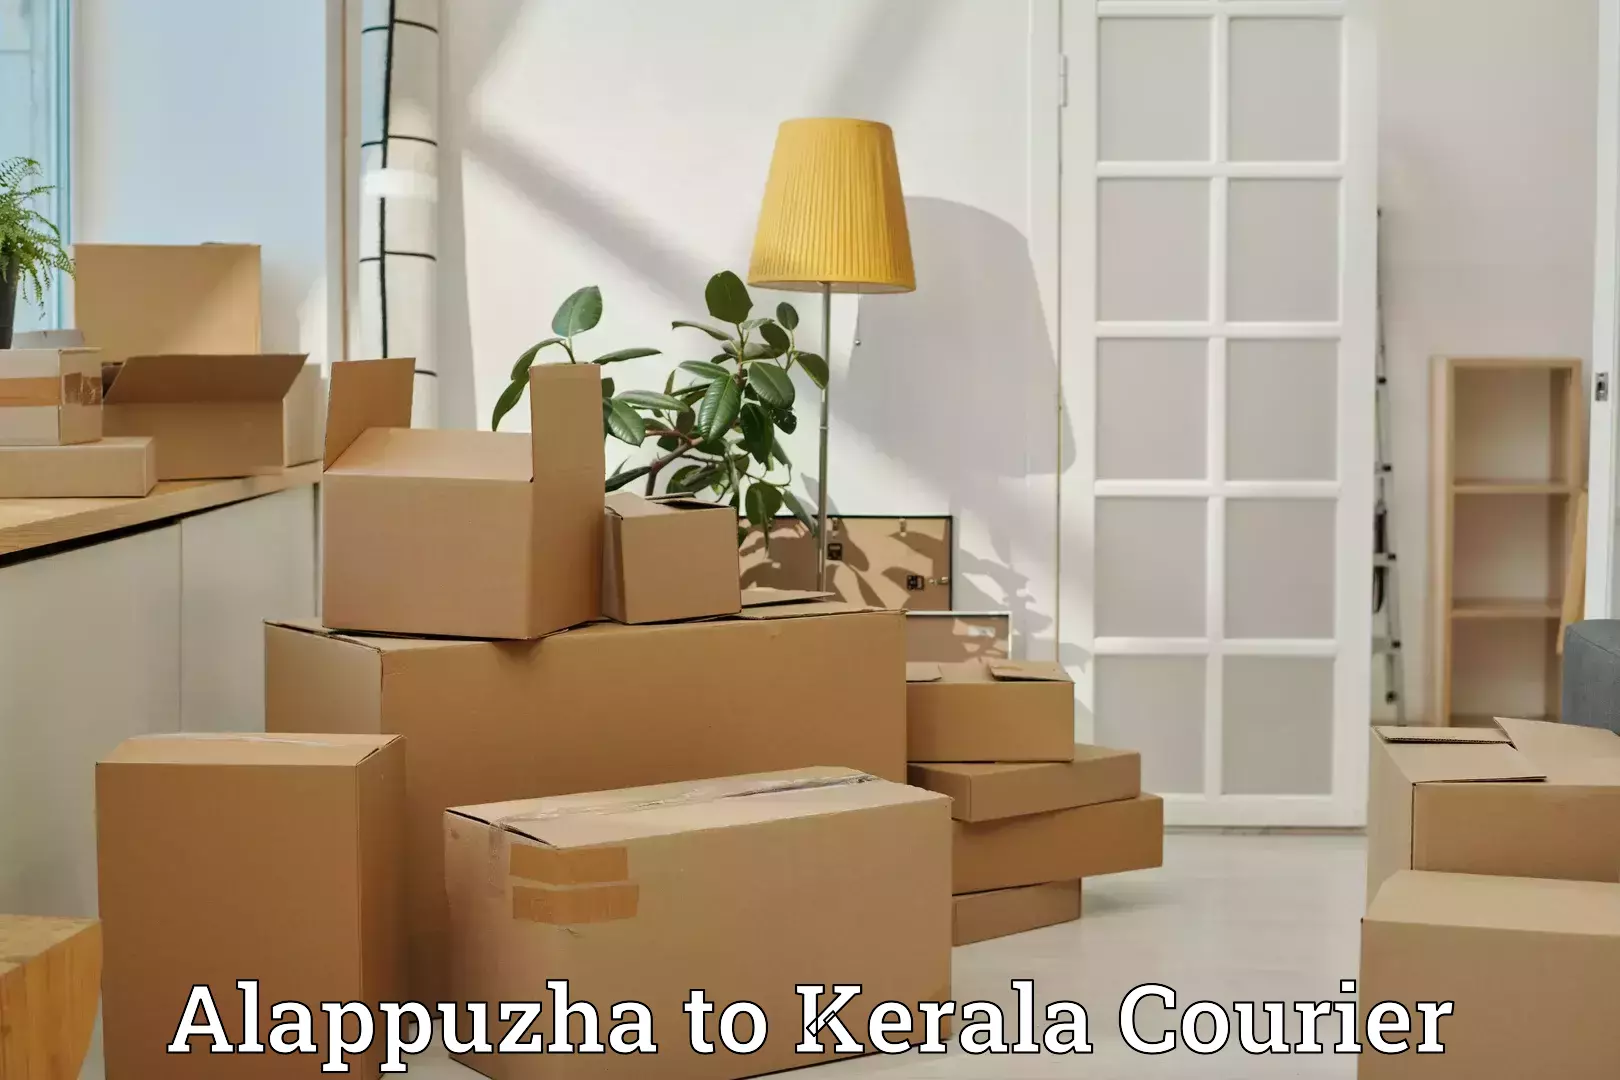 Luggage storage and delivery Alappuzha to Kerala